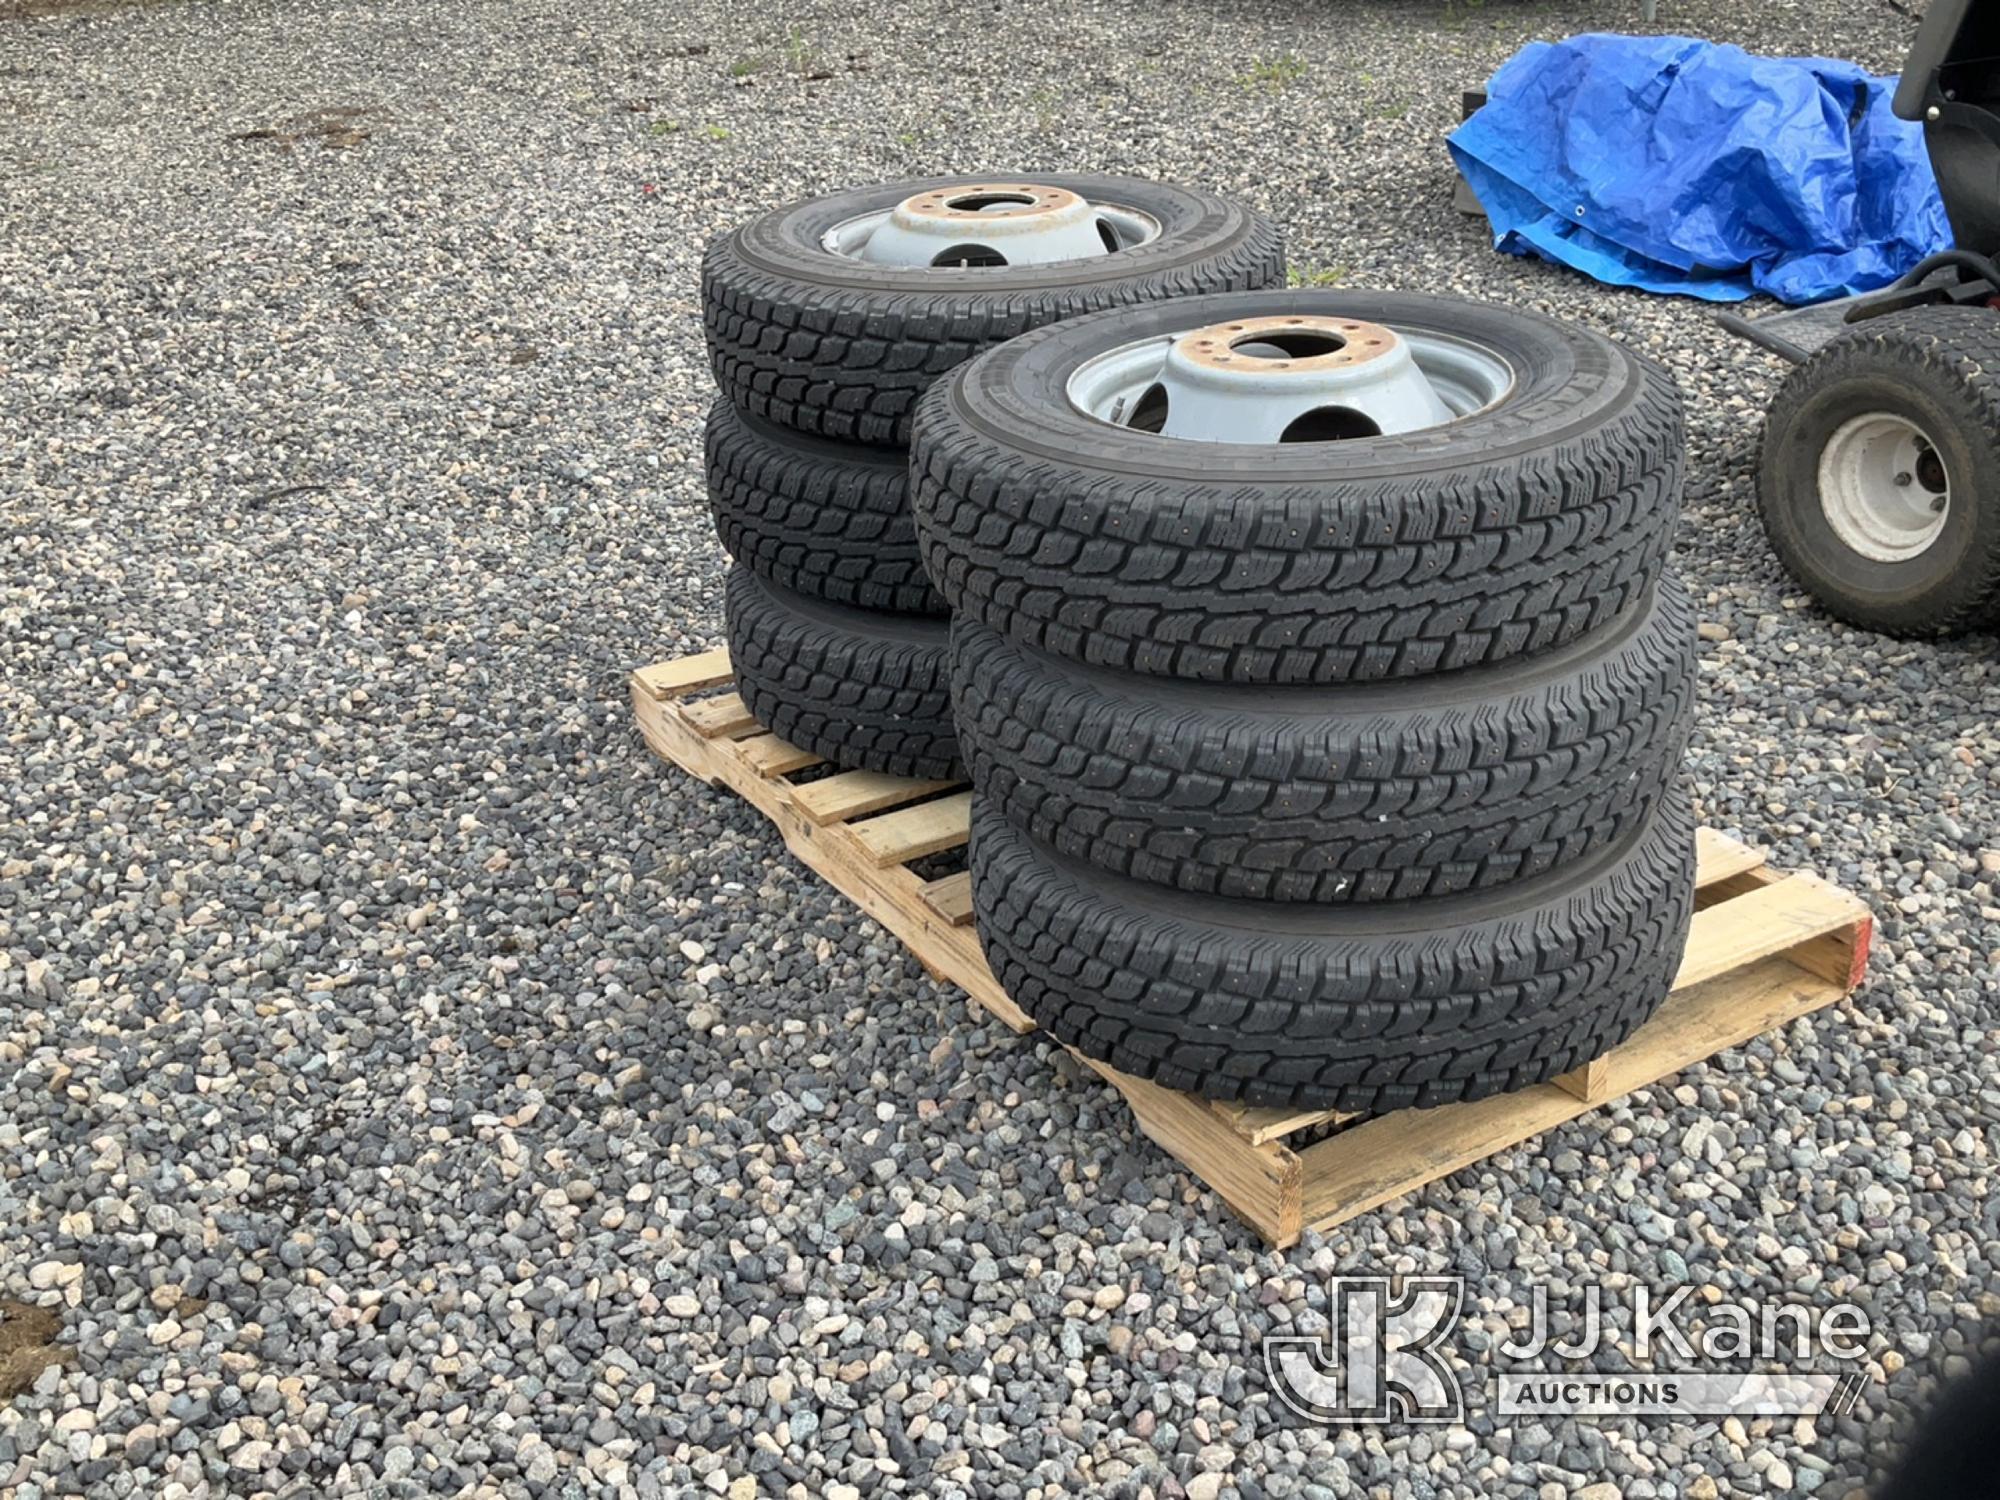 (Portland, OR) Winter Cat LT215/85R15 Snow Tires NOTE: This unit is being sold AS IS/WHERE IS via Ti